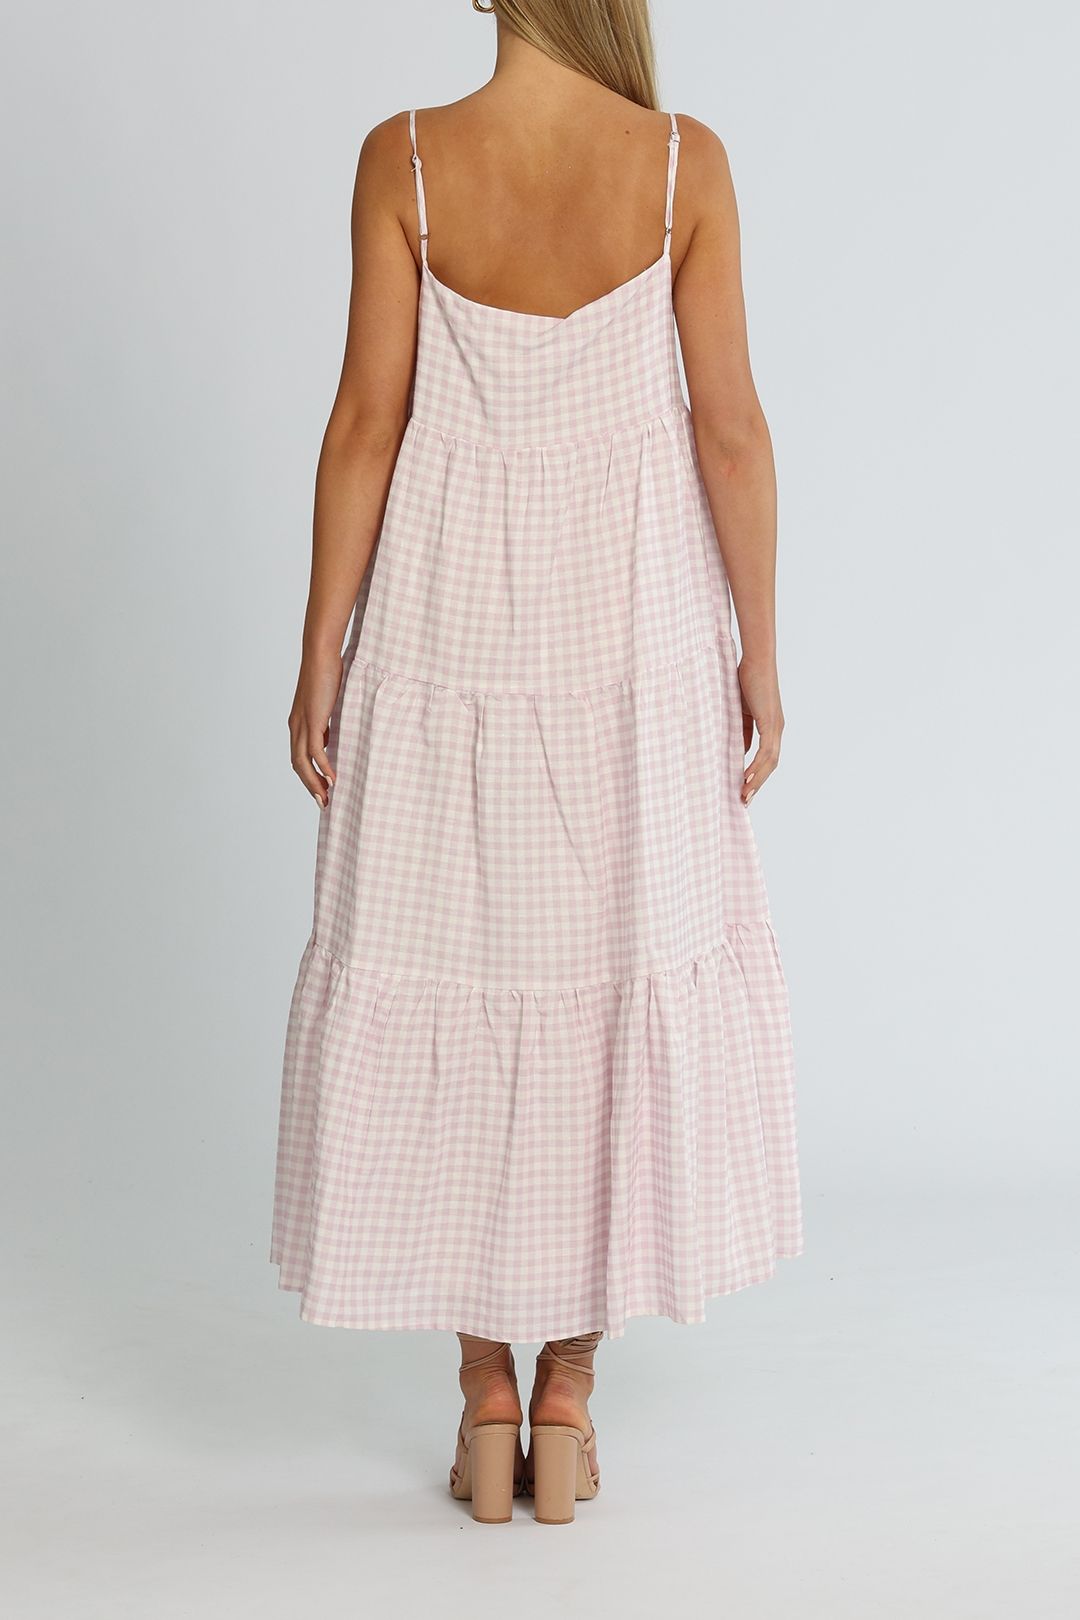 Charlie Holiday The Isabella Maxi Dress Lilac White Gingham Tiered Skirt